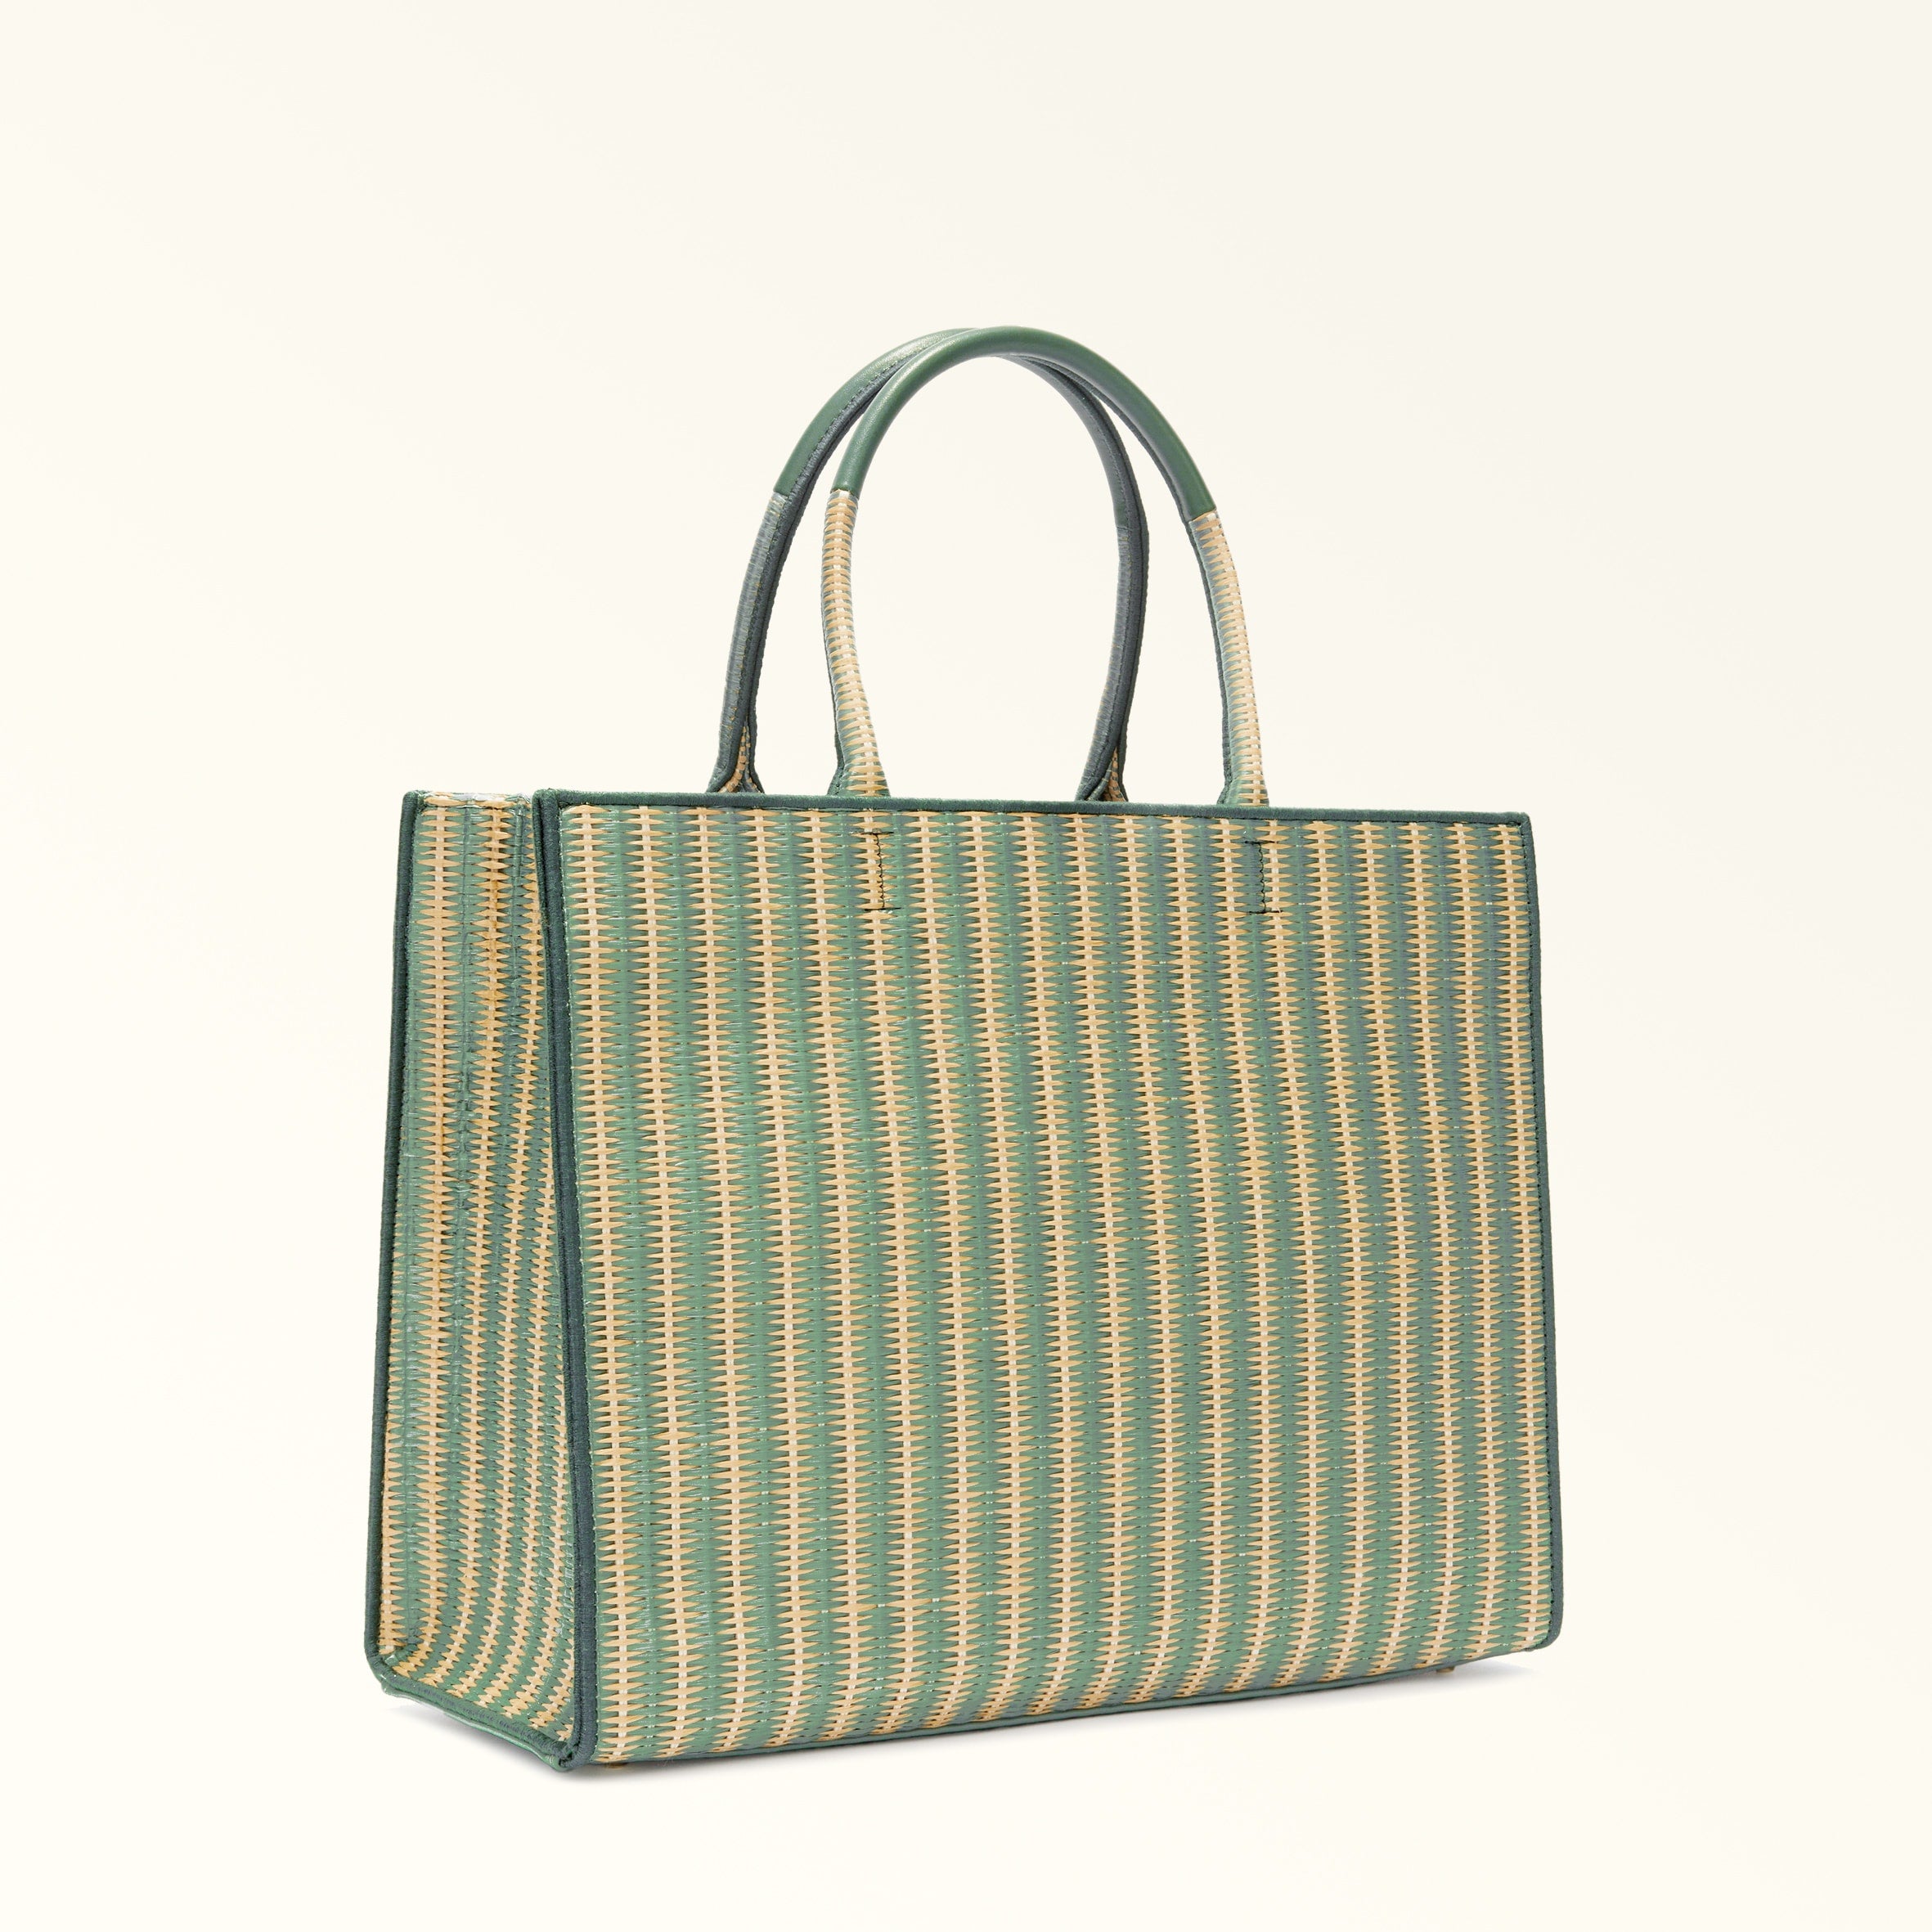 300367 Toni Min Green Opportunity Large Tote